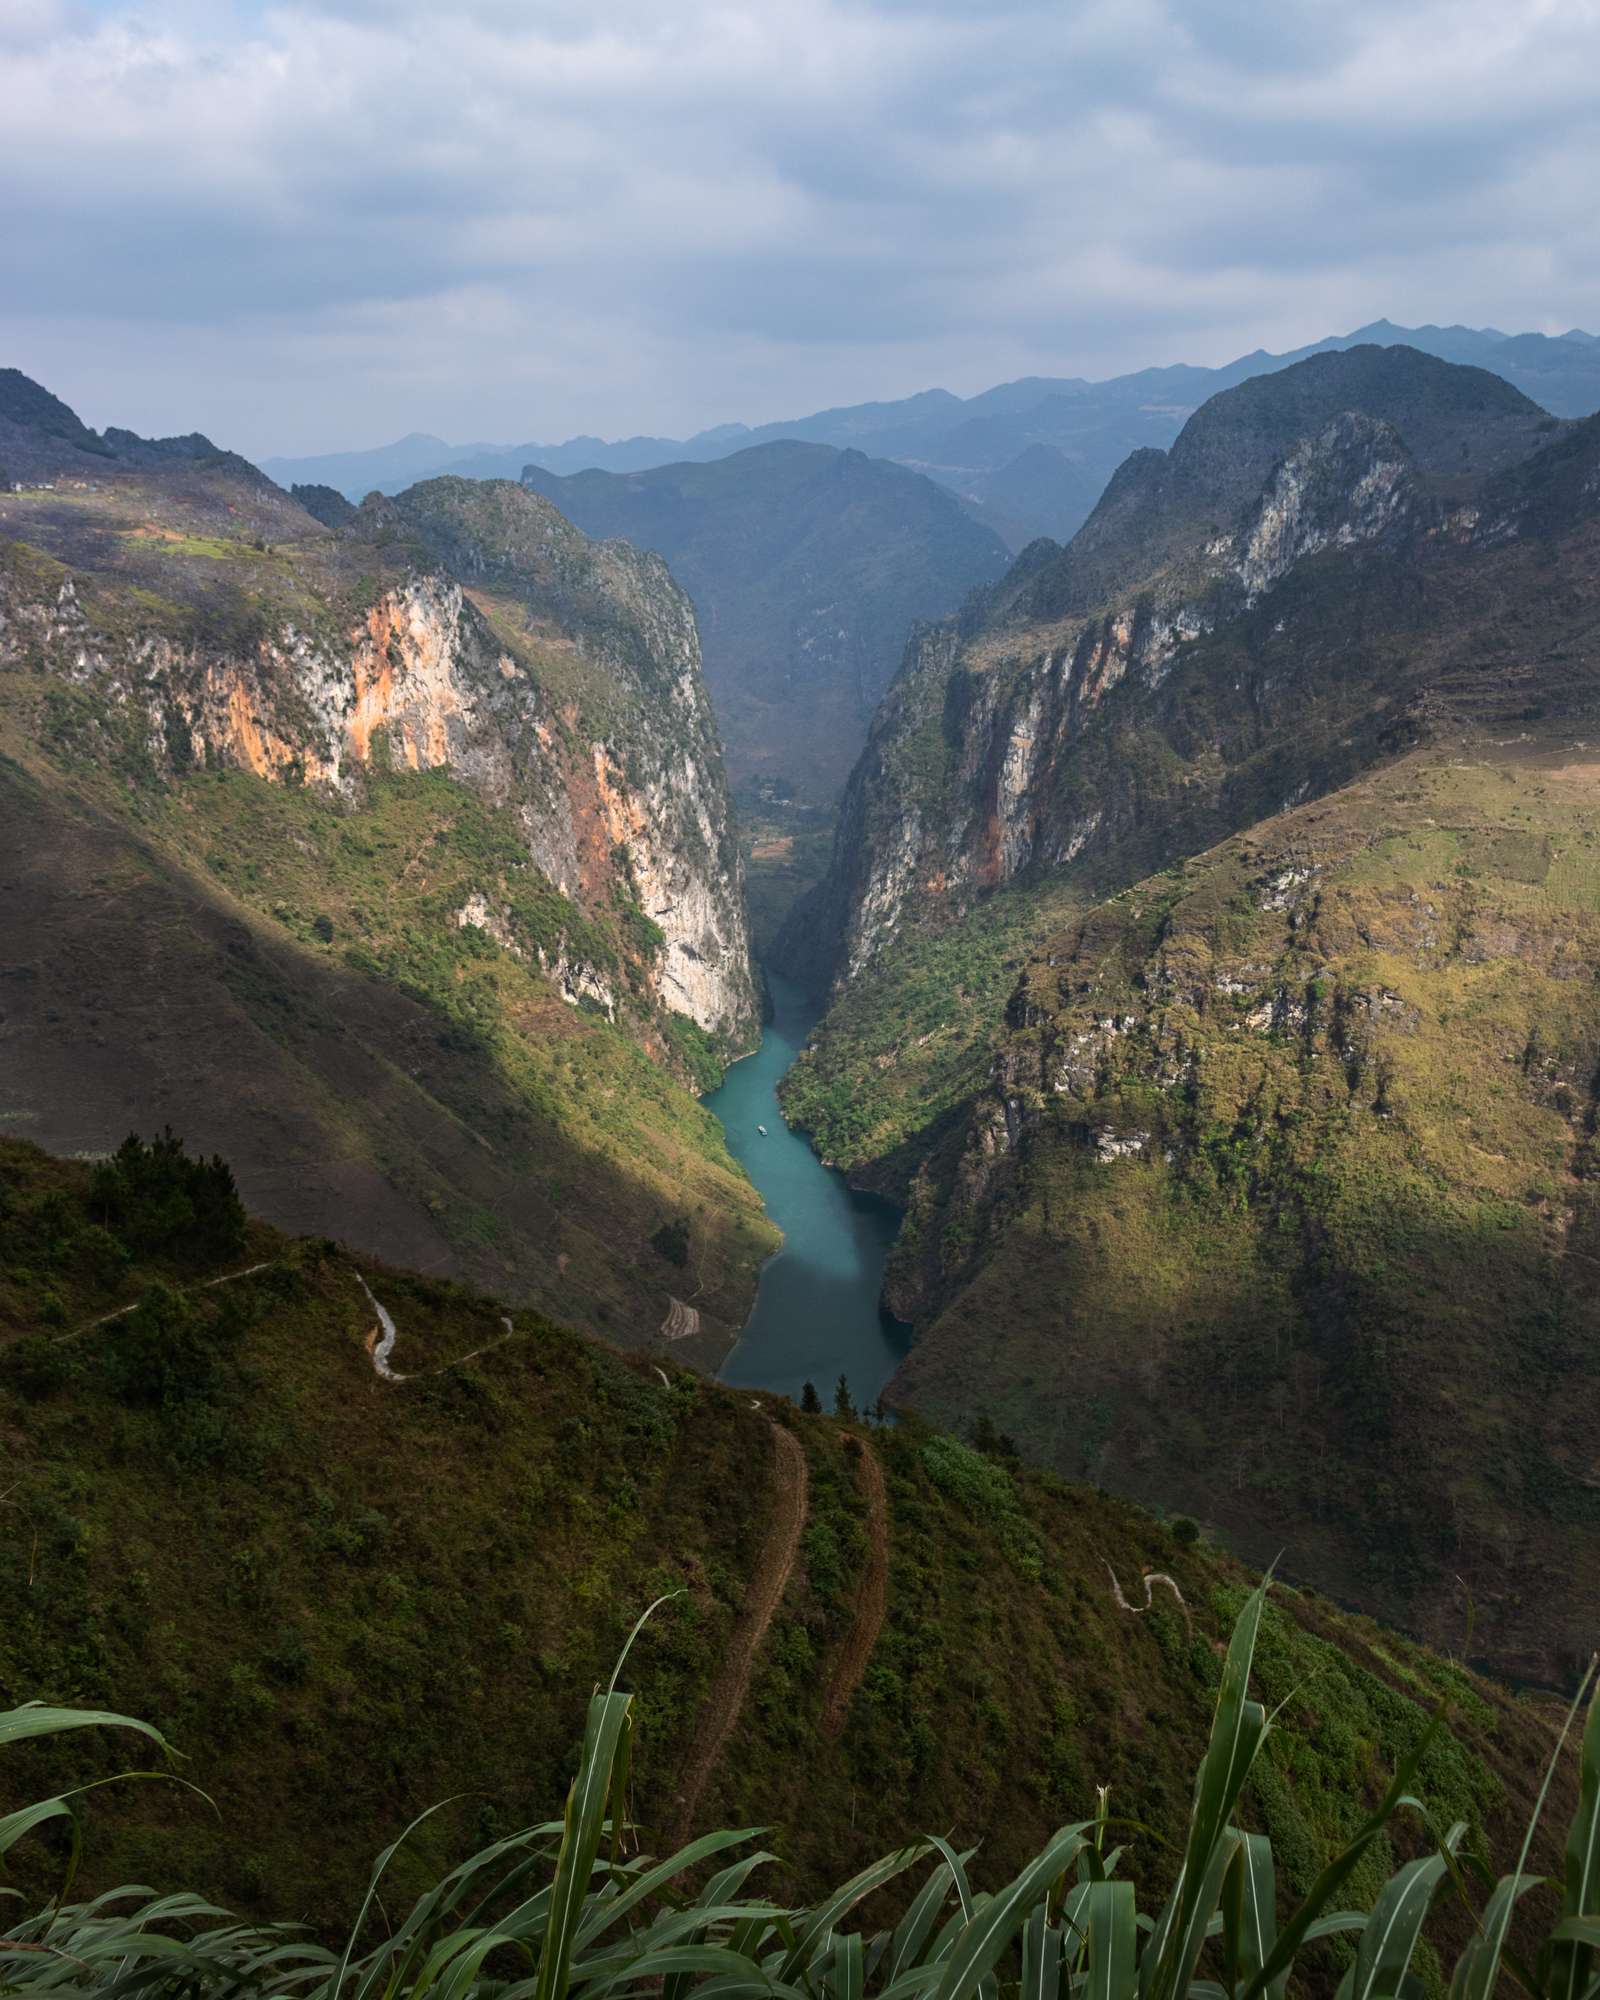 View of the Mekong River from the Ha Giang loop